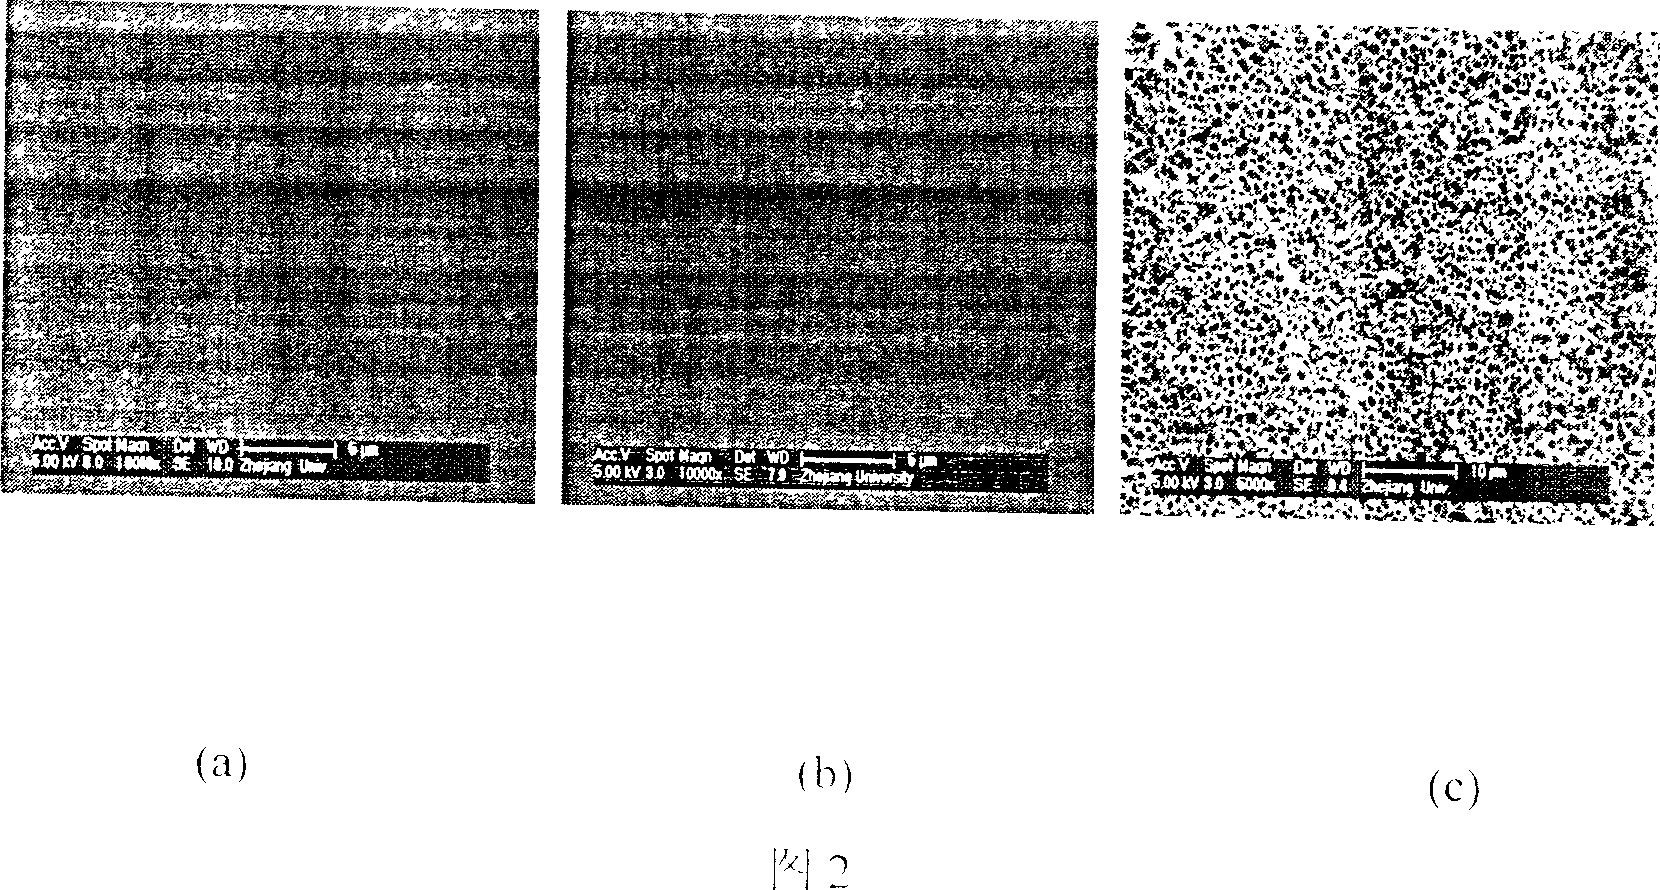 Method of preparing ultra low dielectric constant polyimide membrane by polyamide ester precursor phase transformation